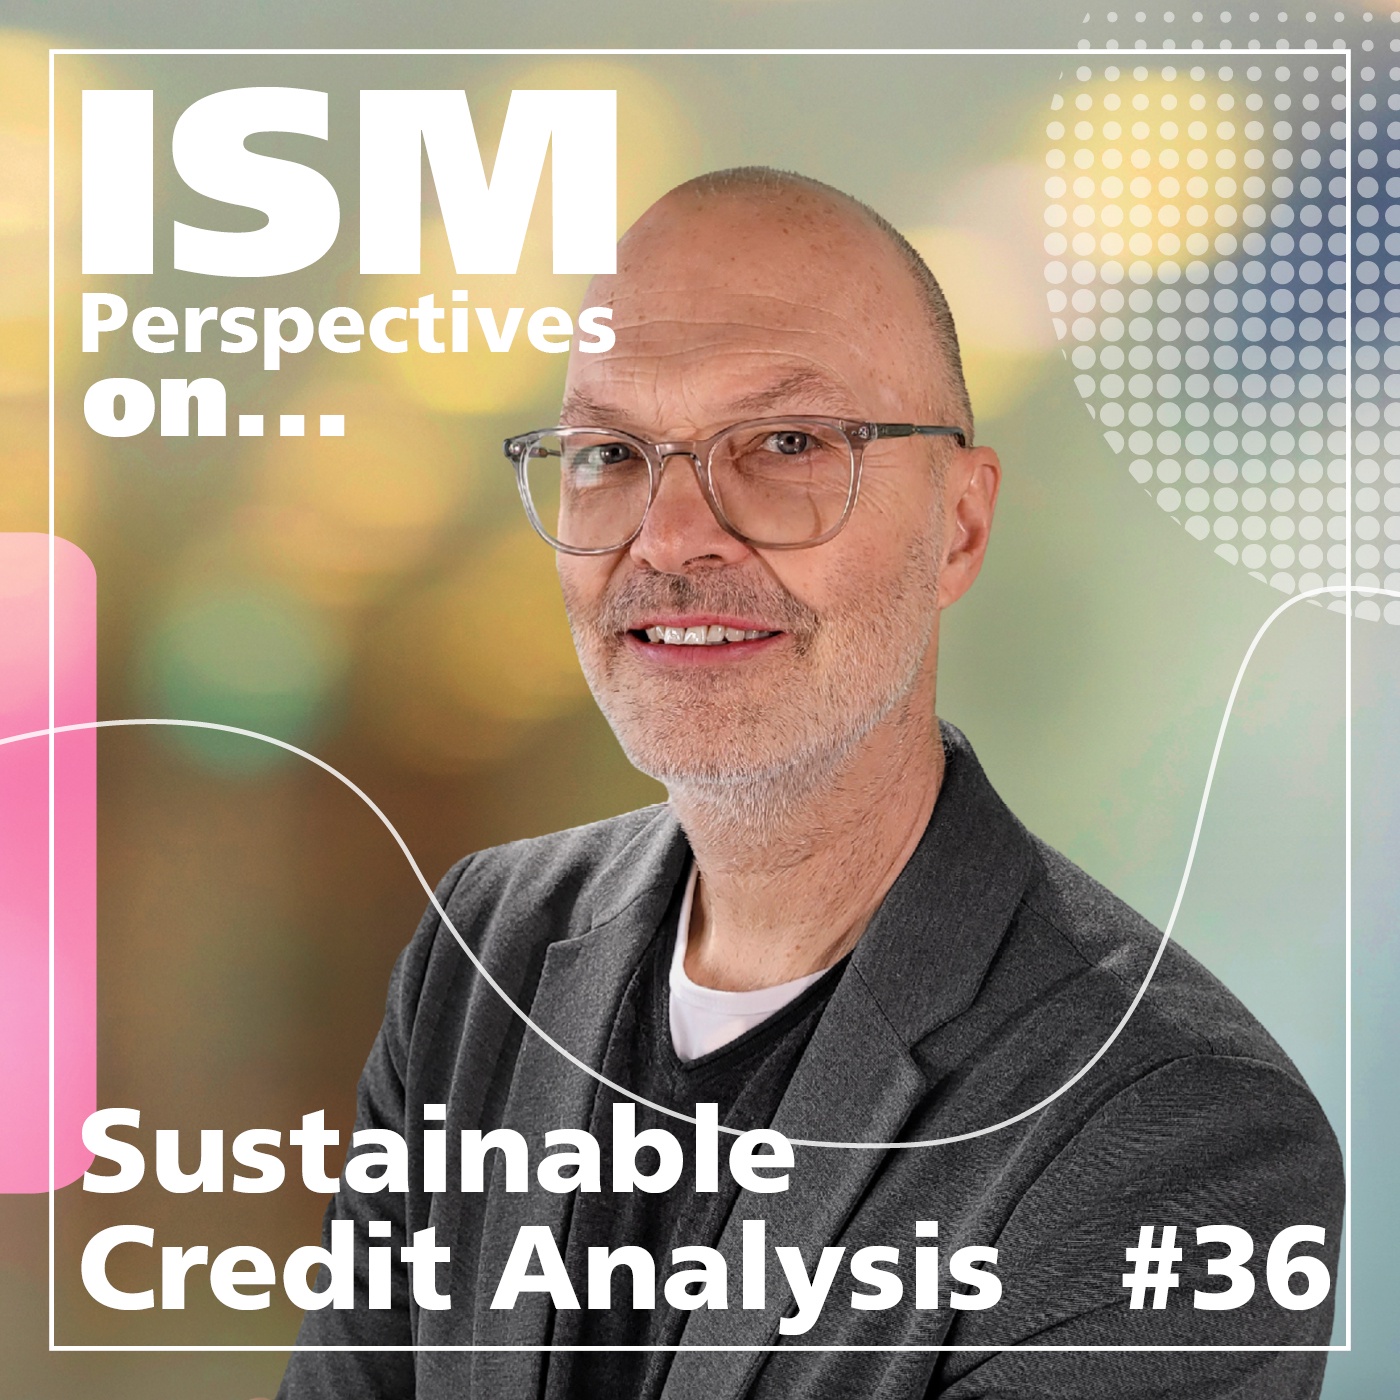 Perspectives on: Sustainable Credit Analysis